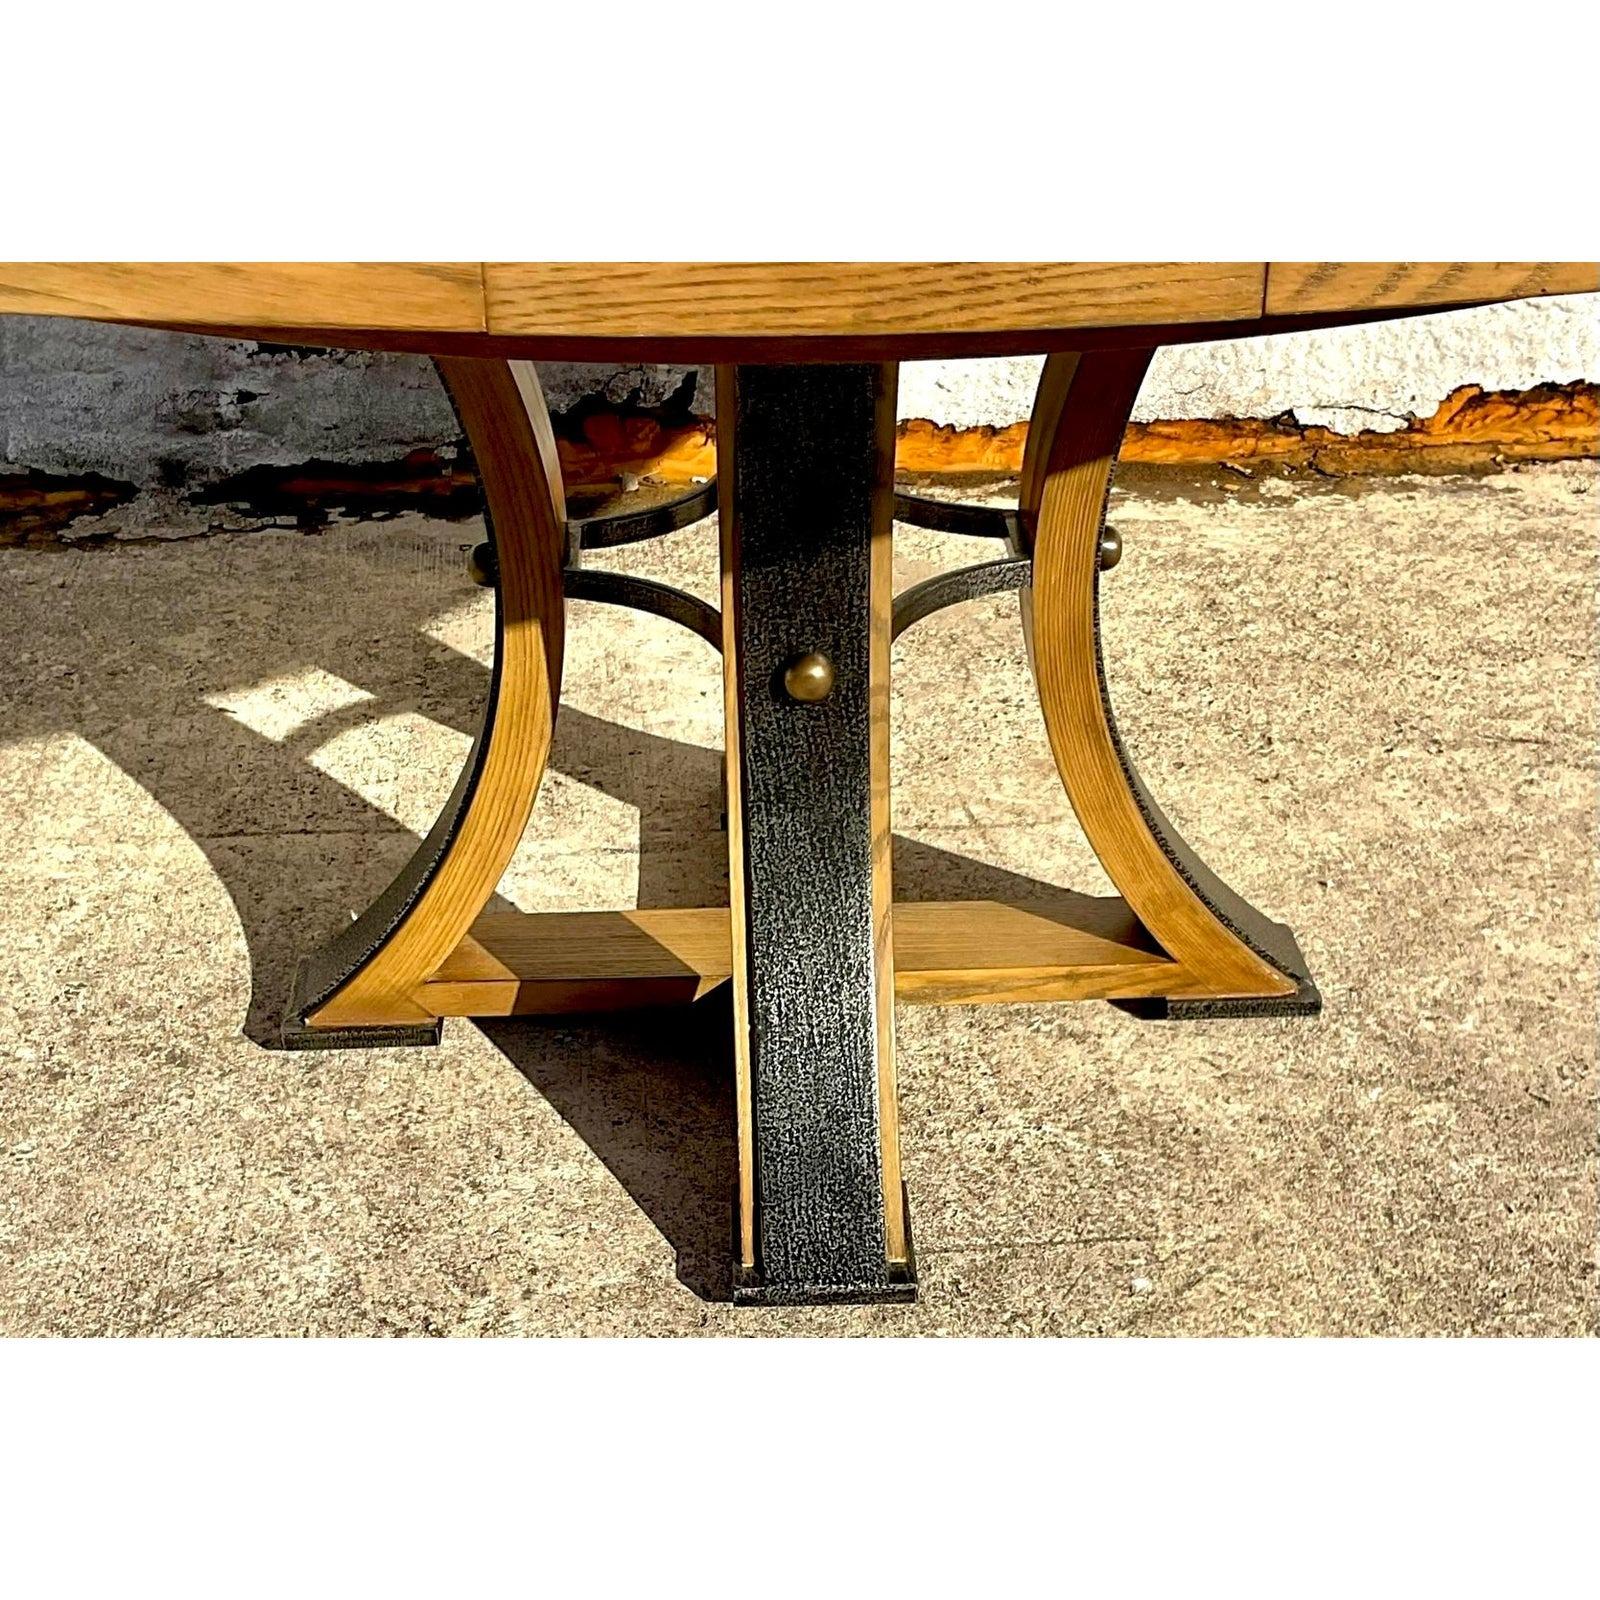 Elevate your dining experience with our Vintage Boho Sarreid IMF Tower Jupe Extendable Dining Table. This distinctive piece combines bohemian flair with timeless elegance, featuring an extendable design perfect for versatile entertaining. Its